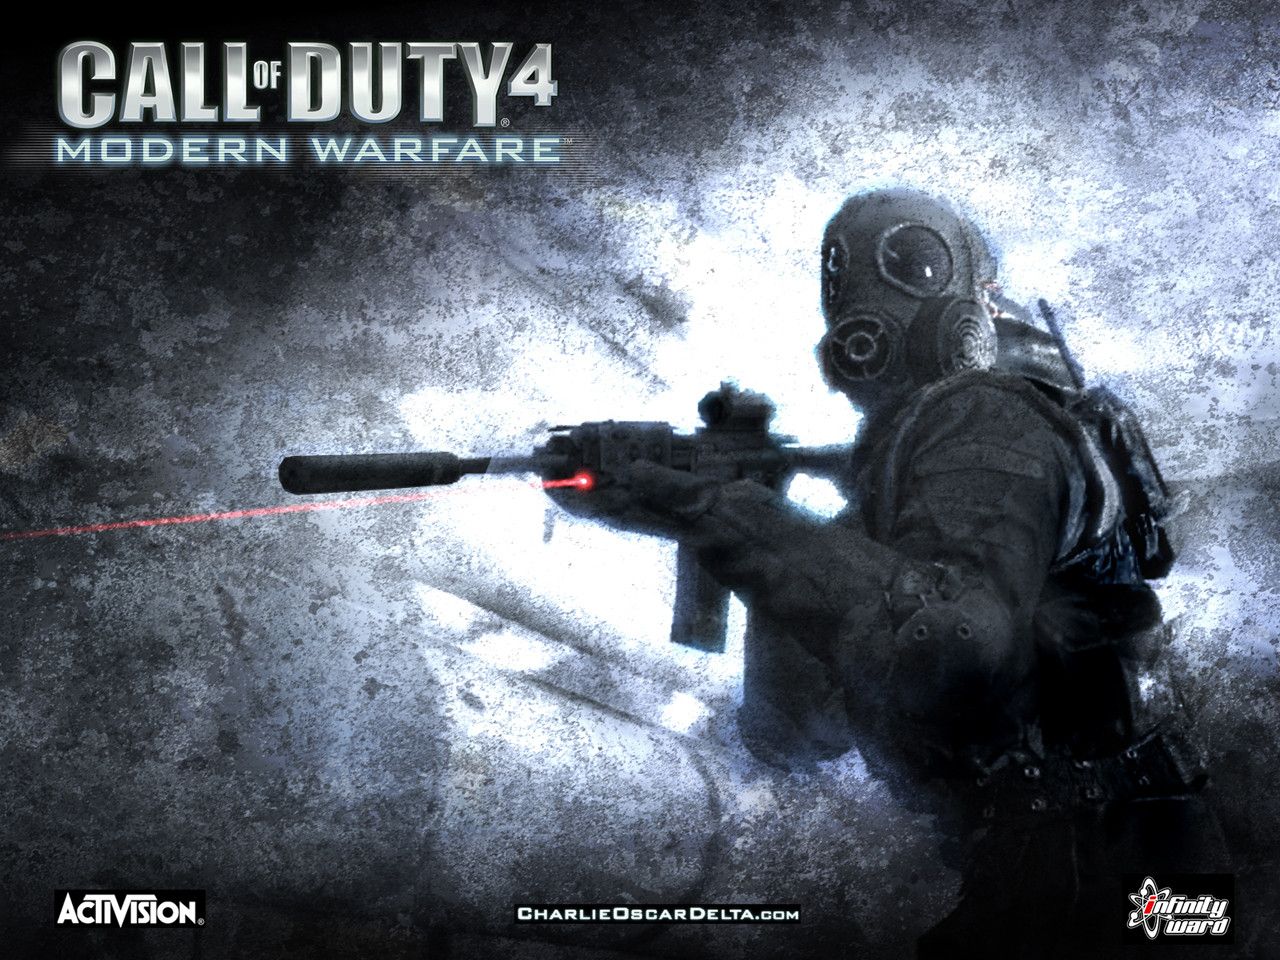 CoD4 Central CoD4 Wallpapers CoD4Central.com Your Main Call